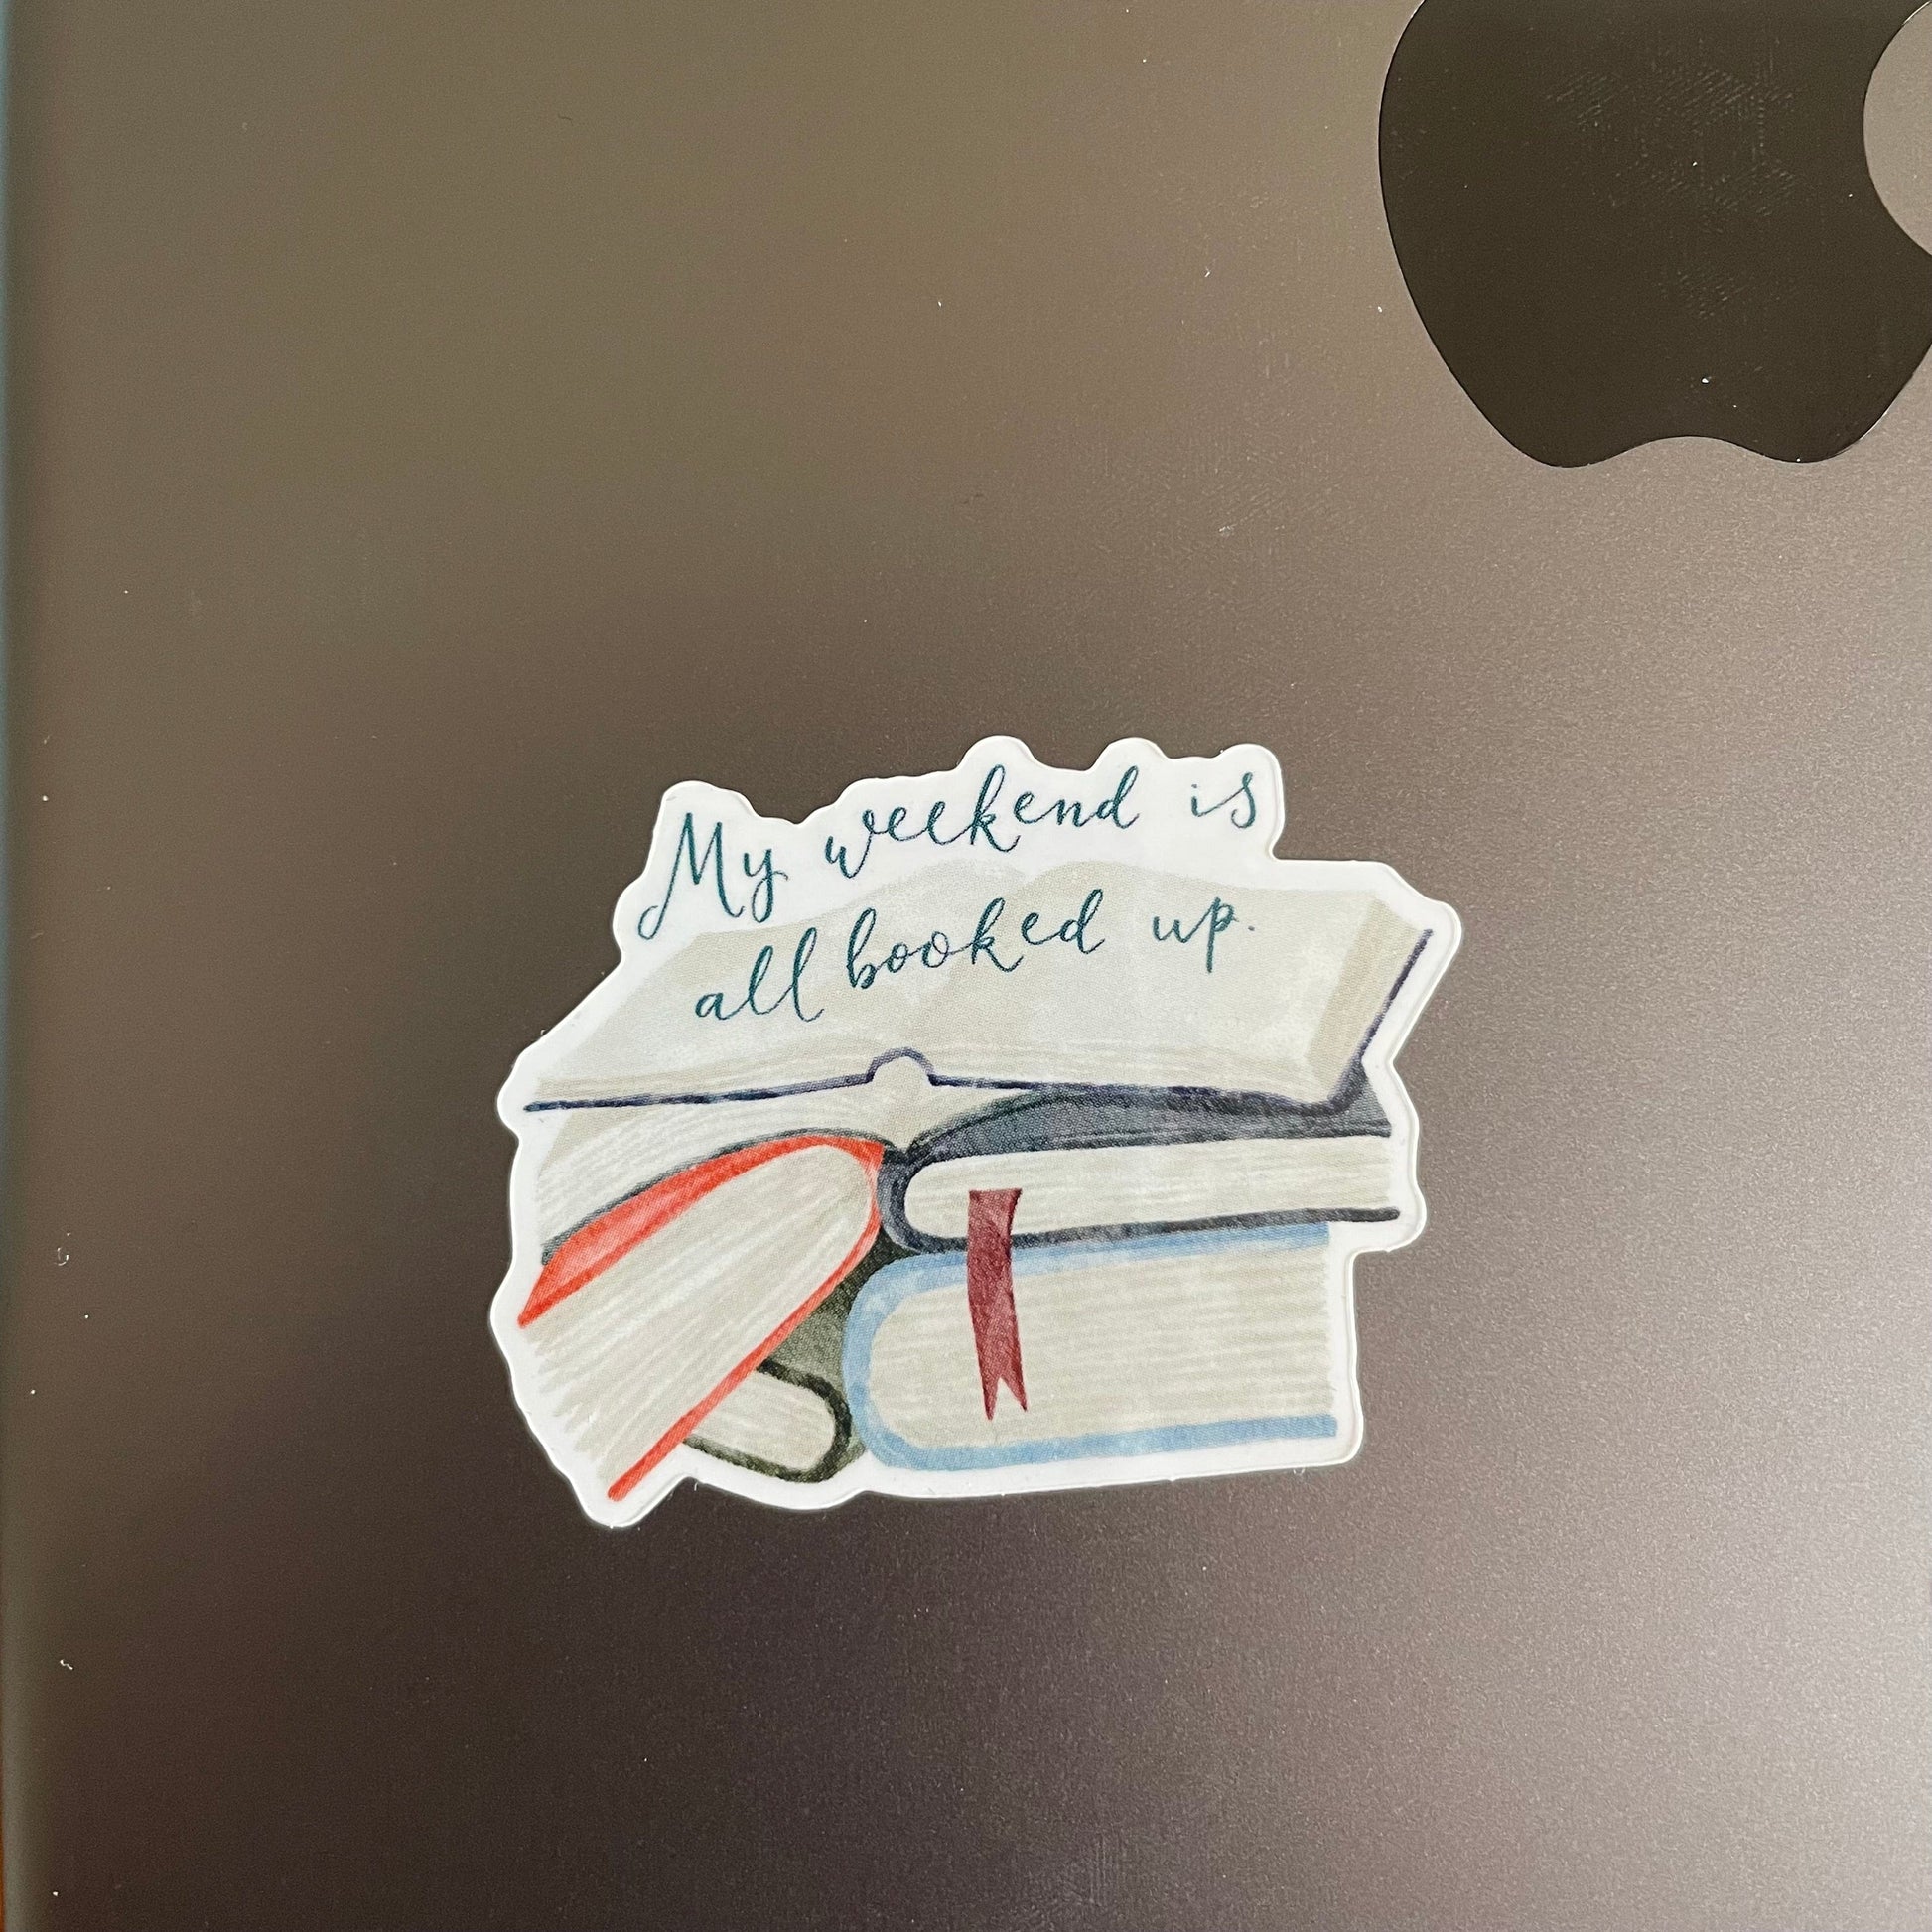 My weekend is all booked up - bookish sticker - vinyl stickers And Hope Designs   